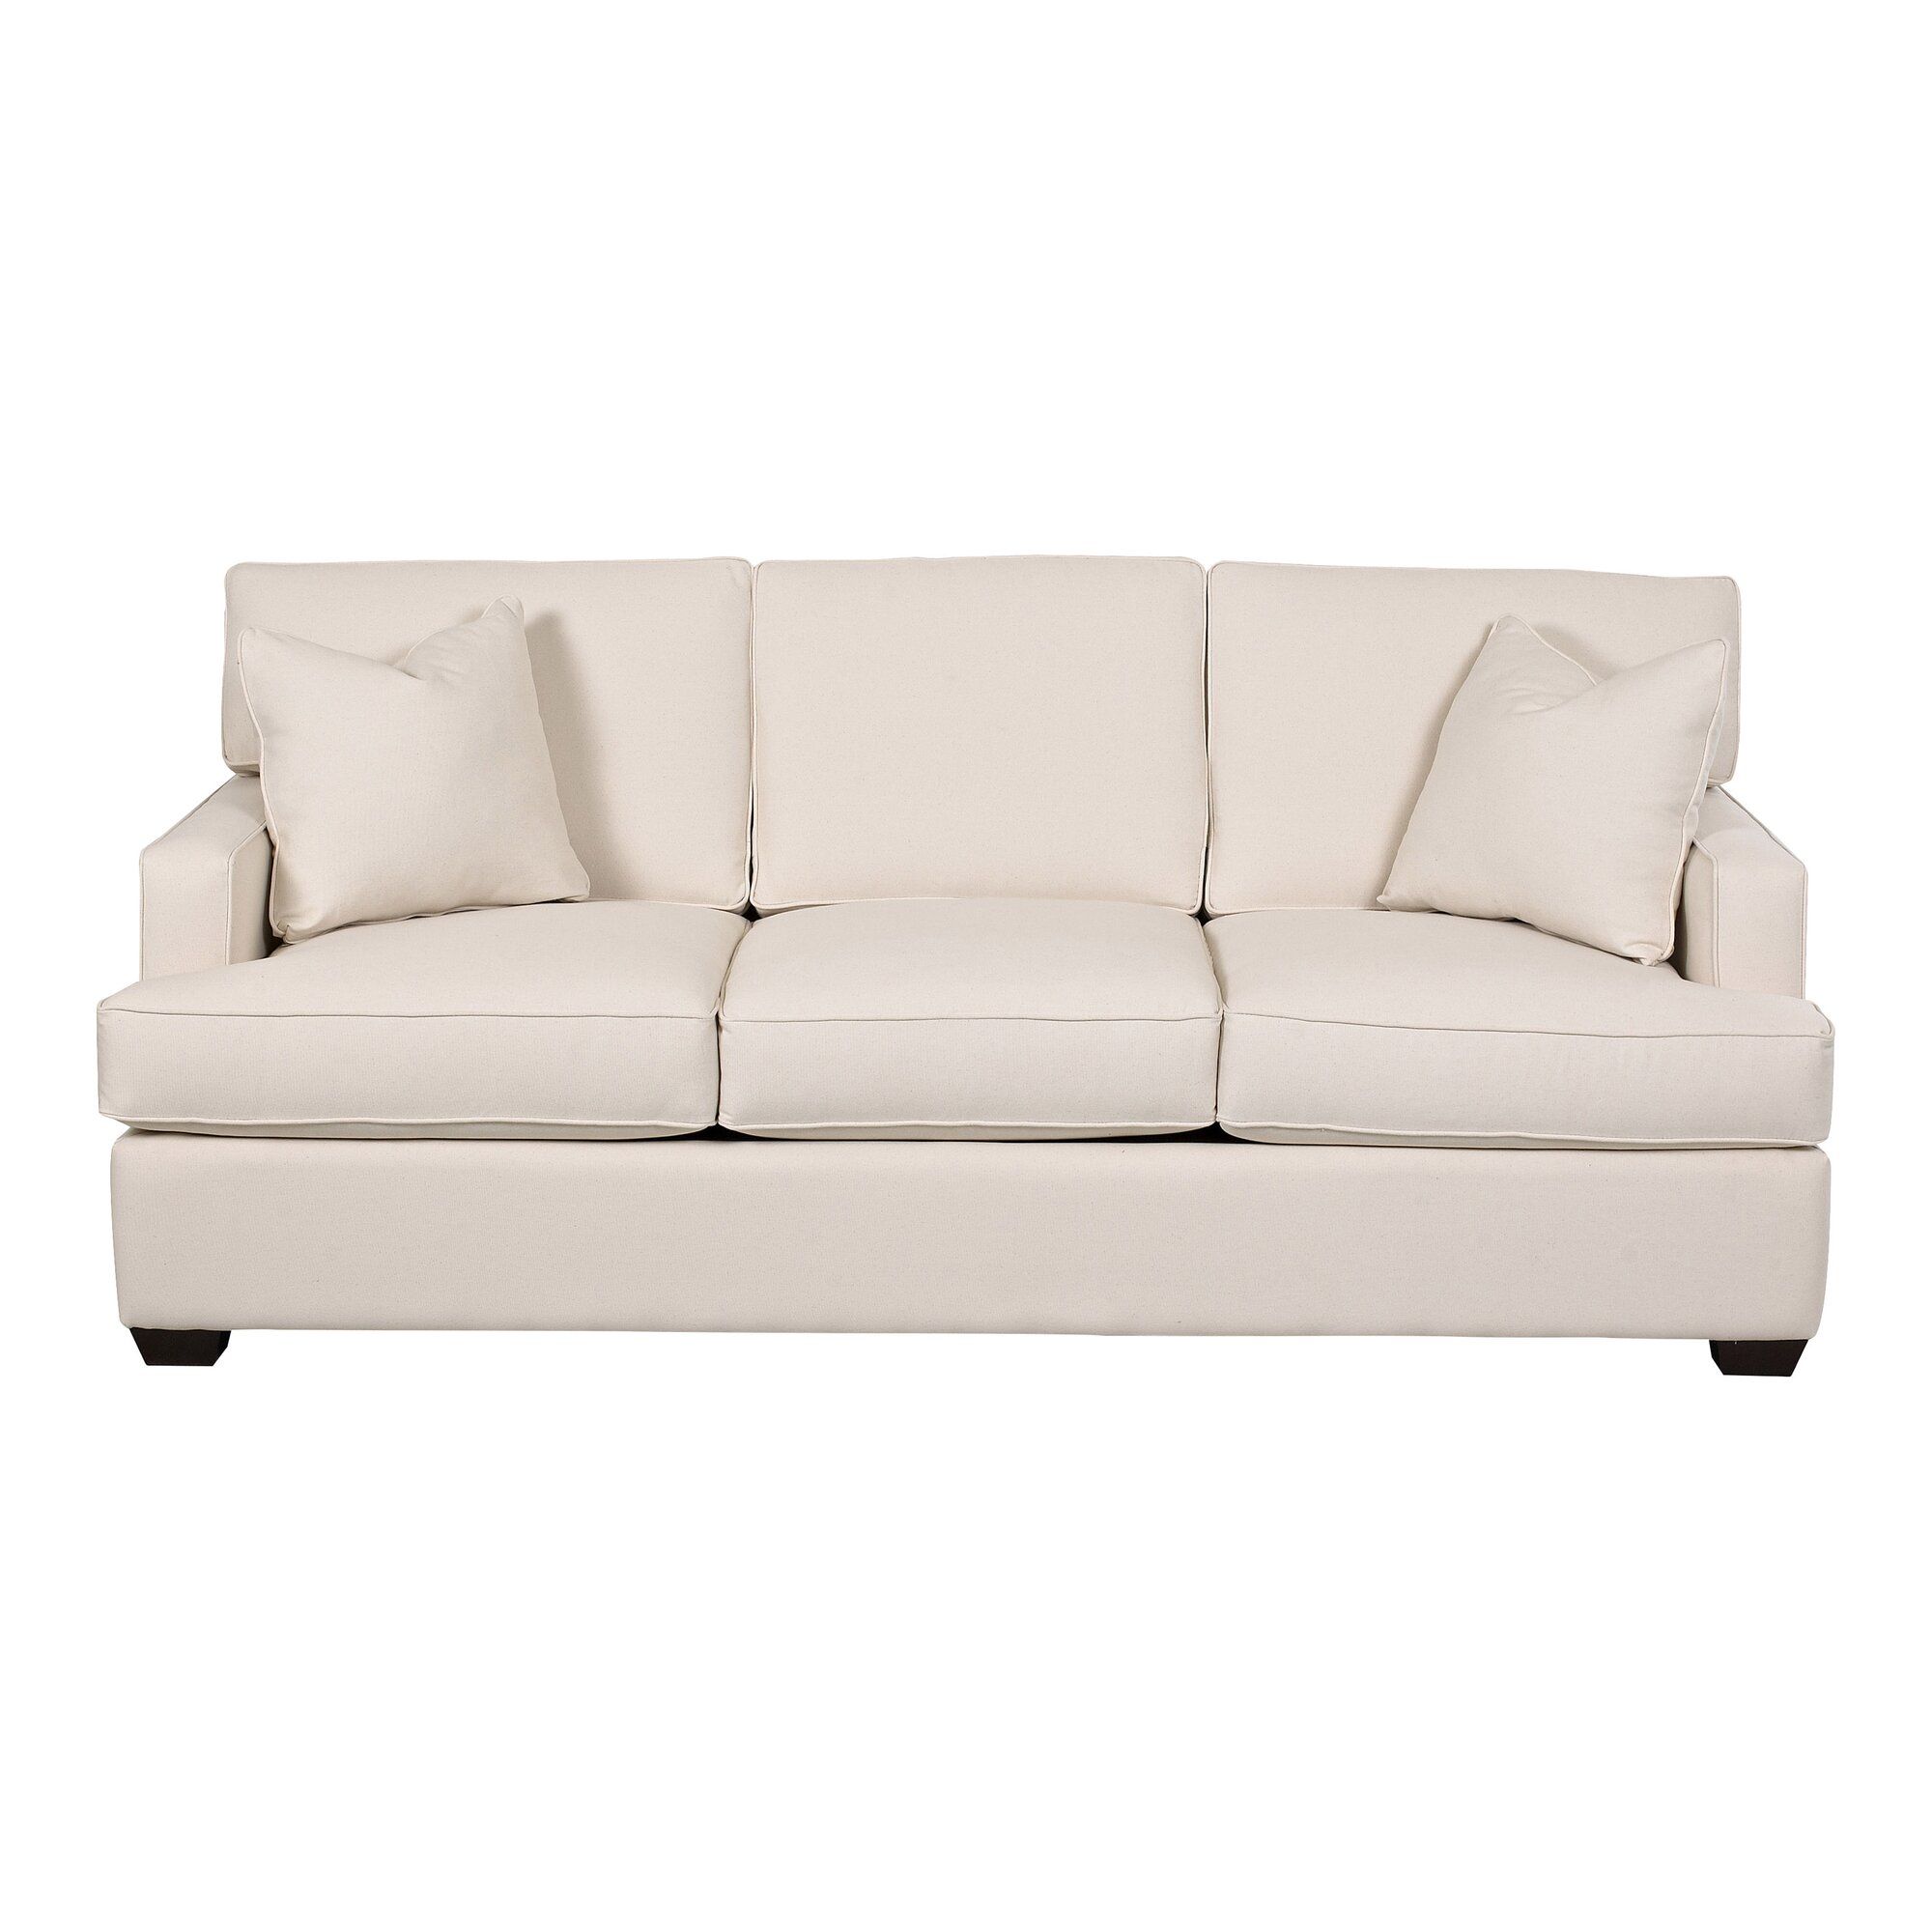 Avery Sofa & Reviews | Allmodern Throughout Camila Poly Blend Sectional Sofas Off White (View 2 of 15)